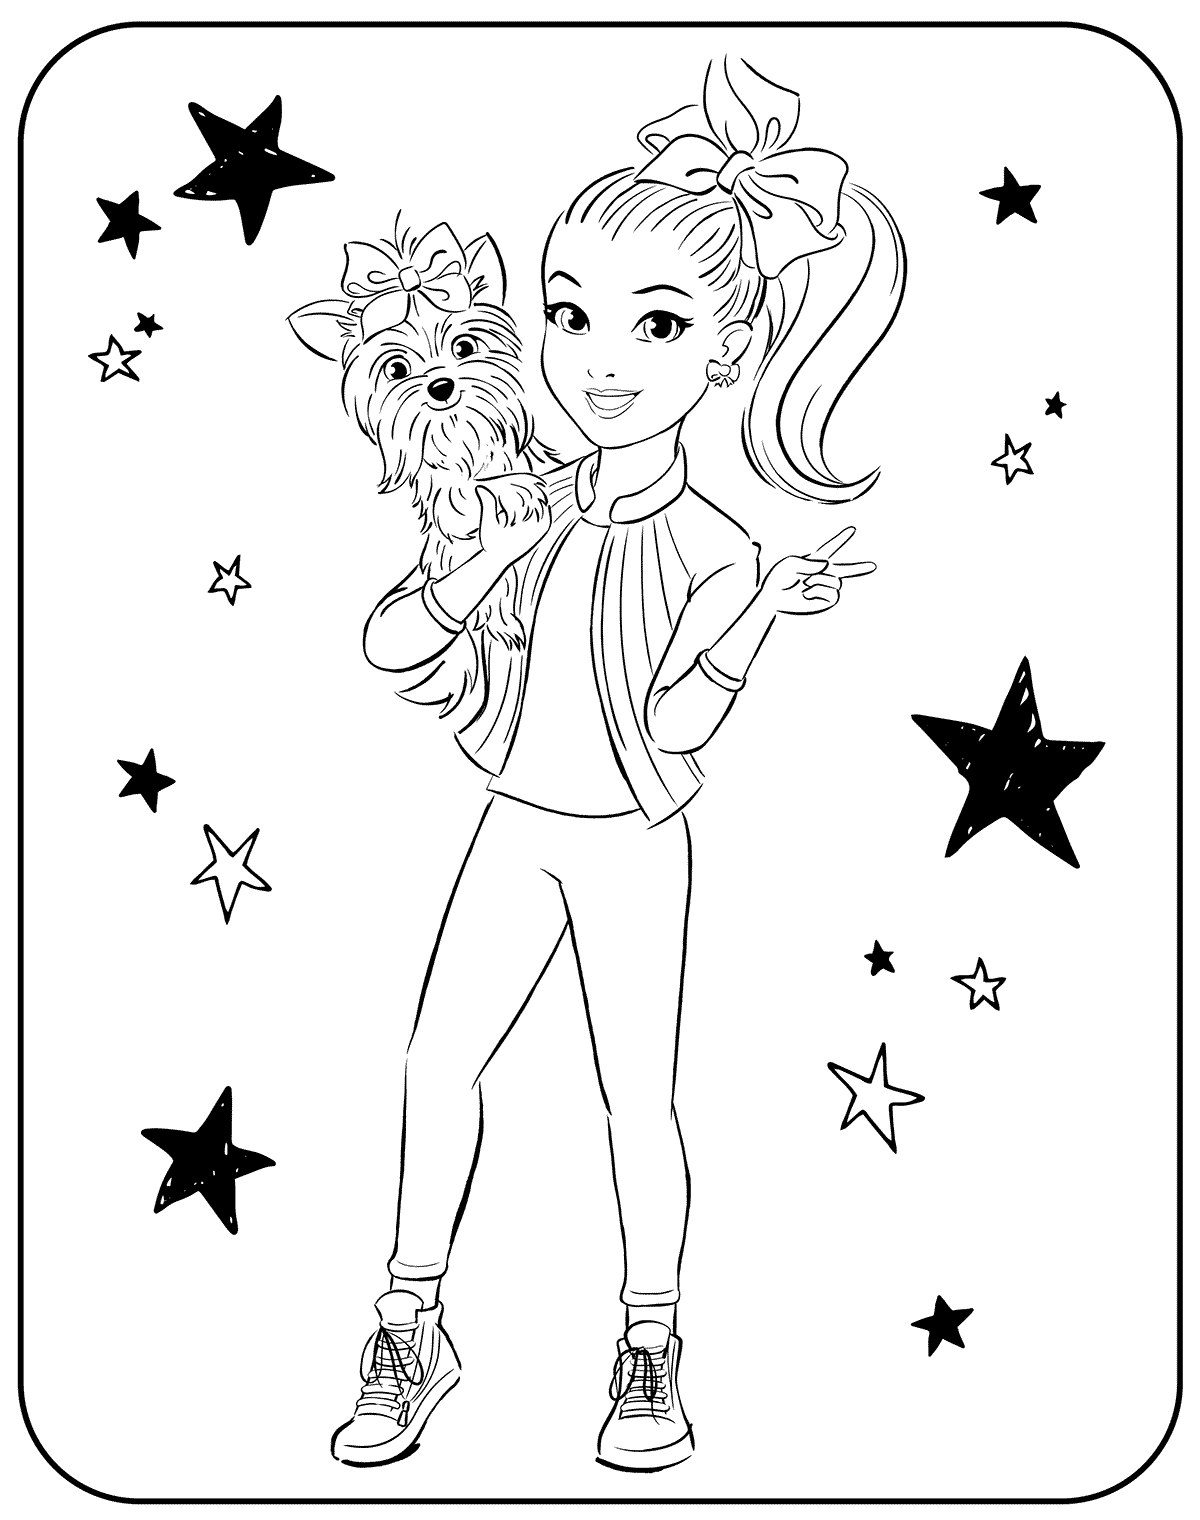 Pin by Mlabell on Coloring pages free and printable | Fall coloring pages, Coloring  pages, Halloween coloring book